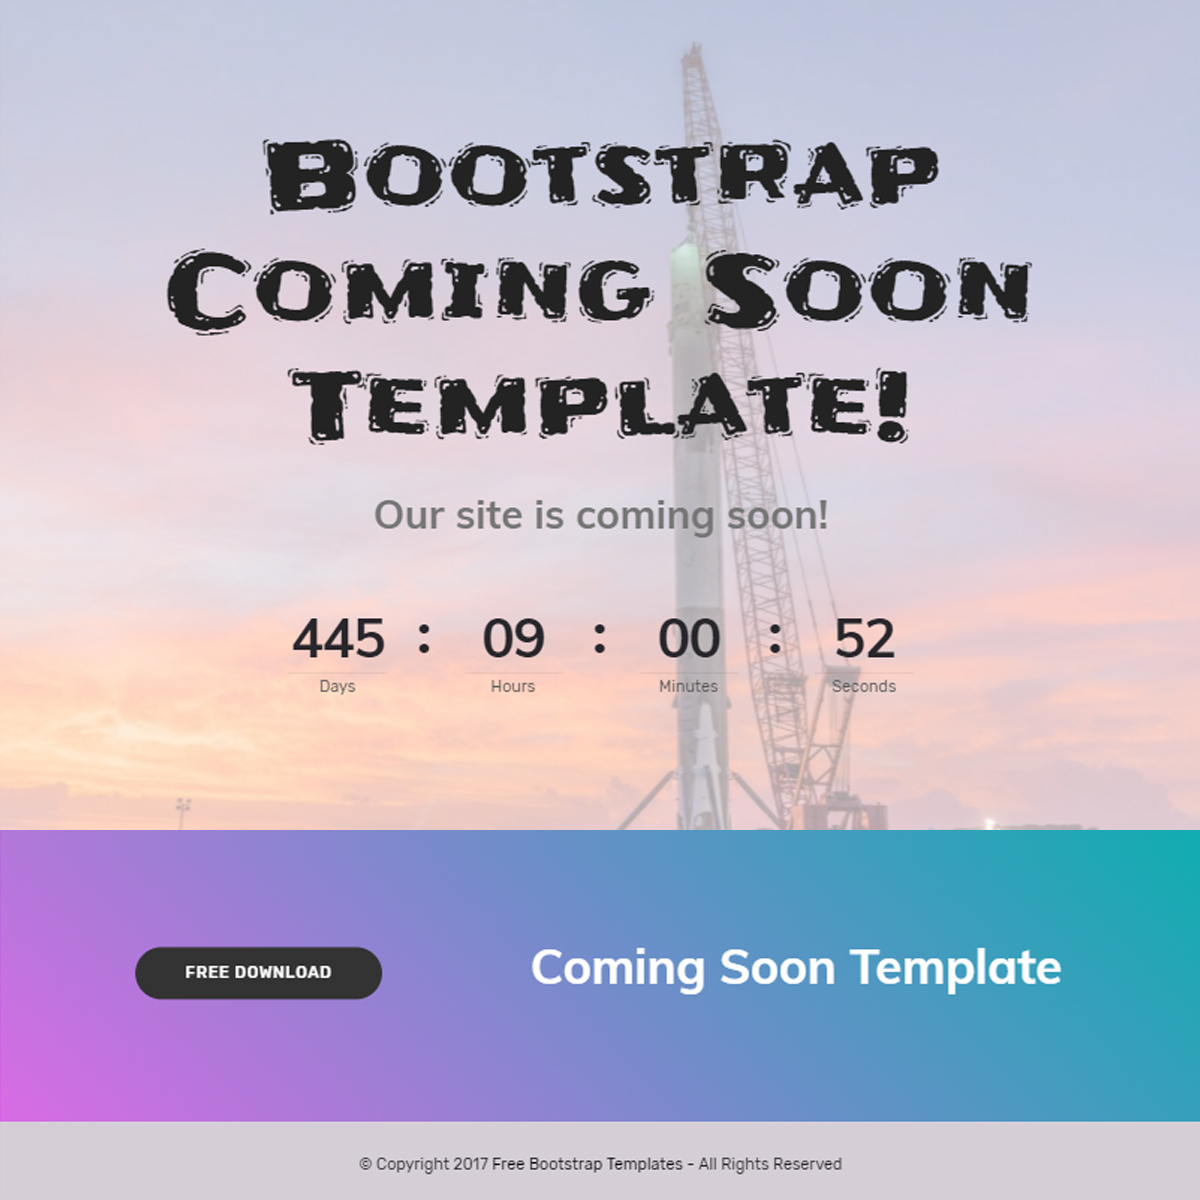 HTML5 Bootstrap Coming Soon Templates